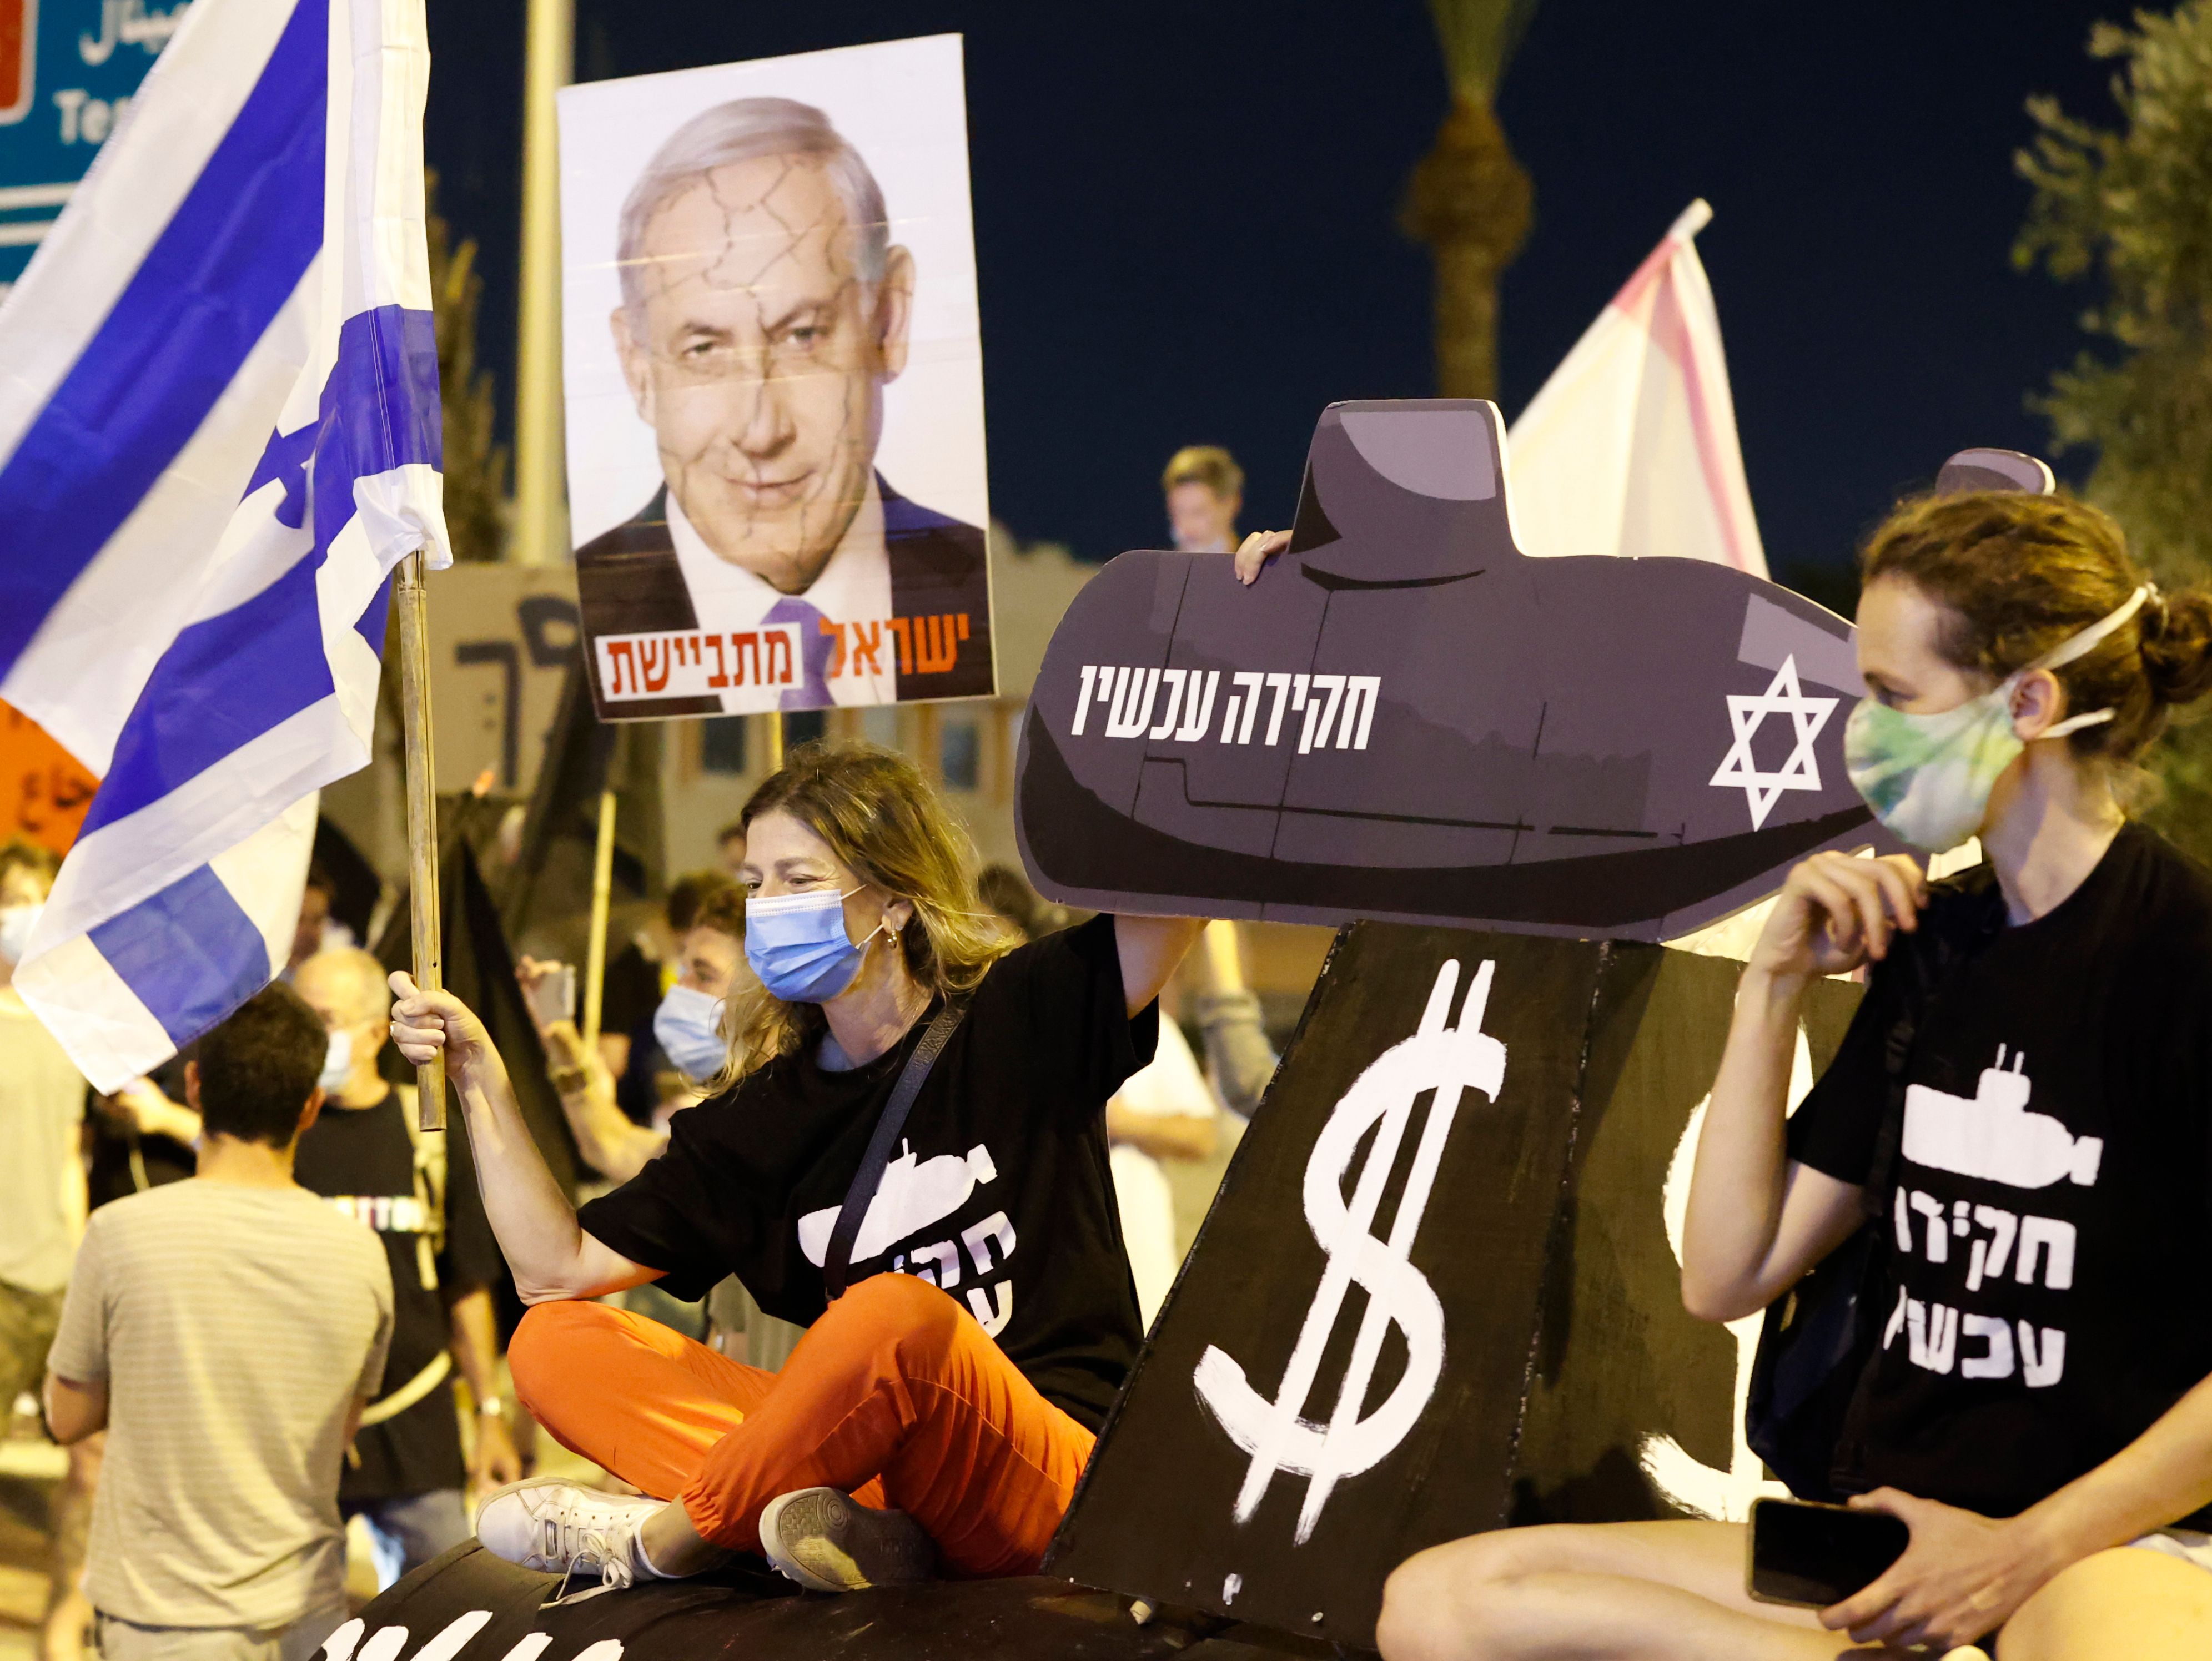 Israeli protesters take part in an anti-government demonstration outside the Ben Gurion Airport near Tel Aviv on September 13, 2020, demanding the resignation of Prime Minister Benjamin Netanyahu over several corruption indictments and his handling of the coronavirus crisis. (Jack Guez—AFP/Getty Images)